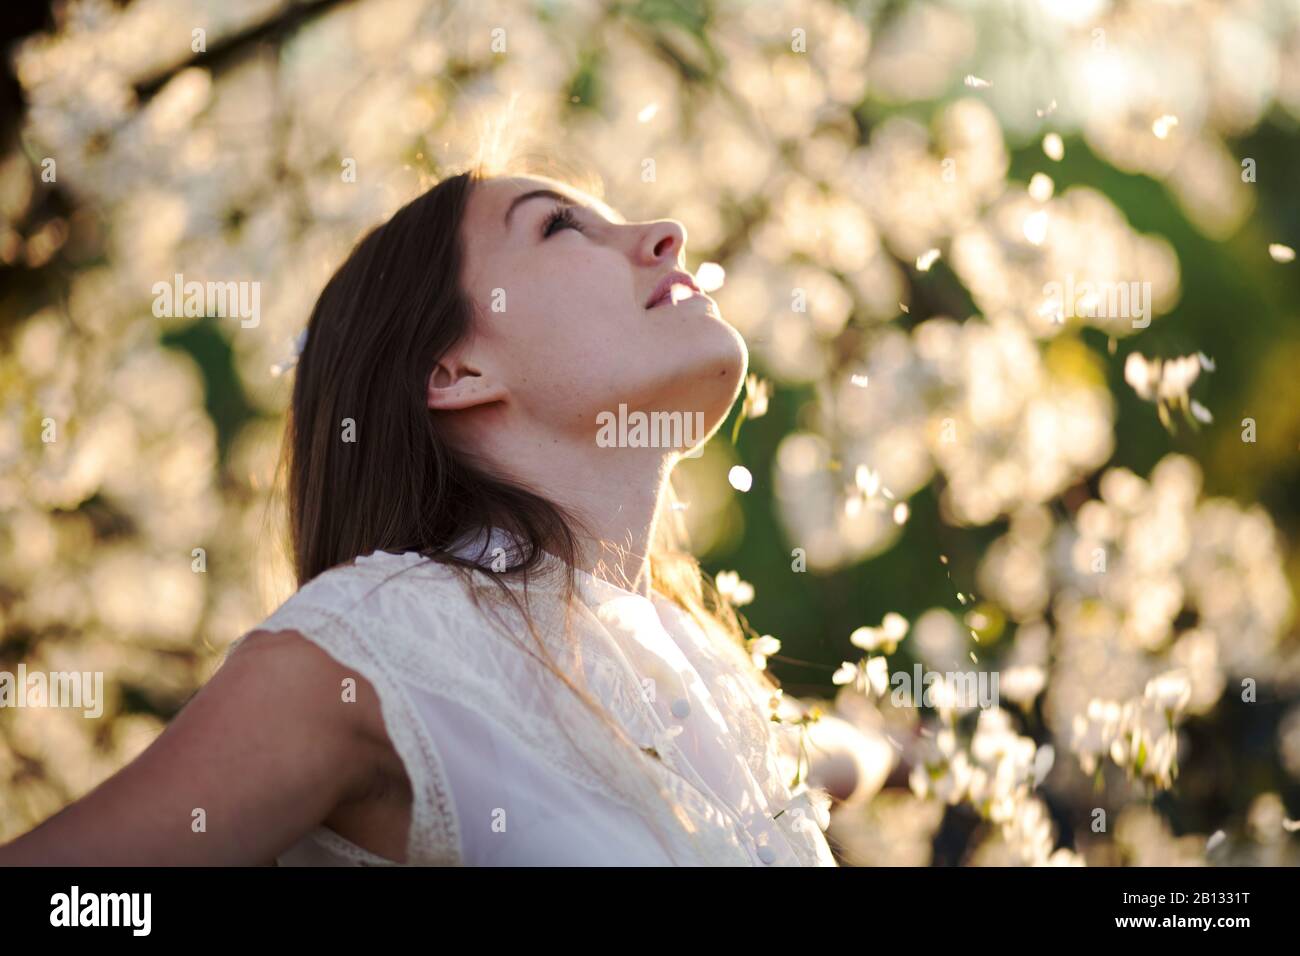 Portrait of a young woman with cherry blossoms Stock Photo